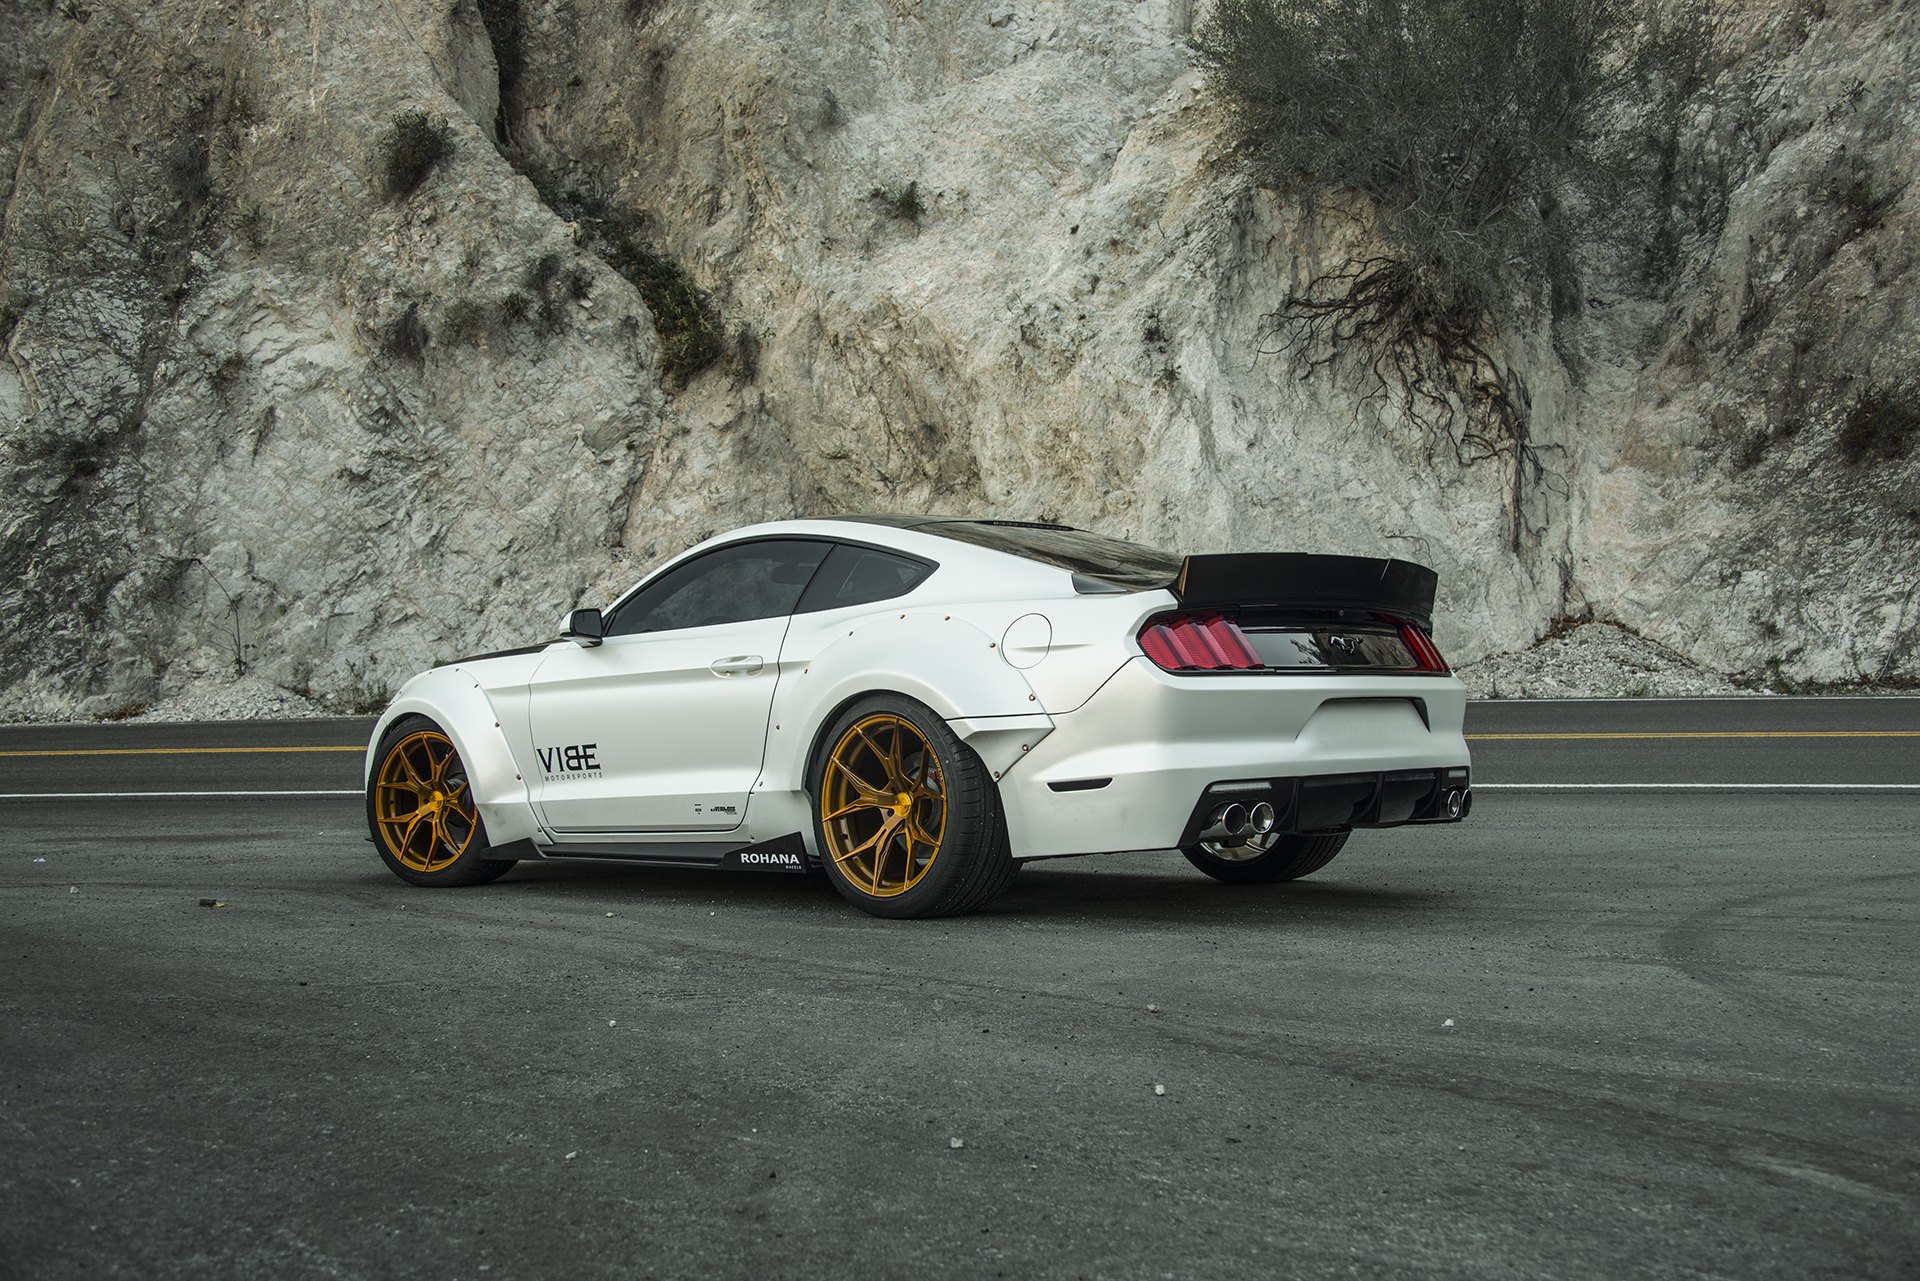 Gold Custom Painted Rohana Wheels on Mustang GT - Photo by Vibe Motorsports